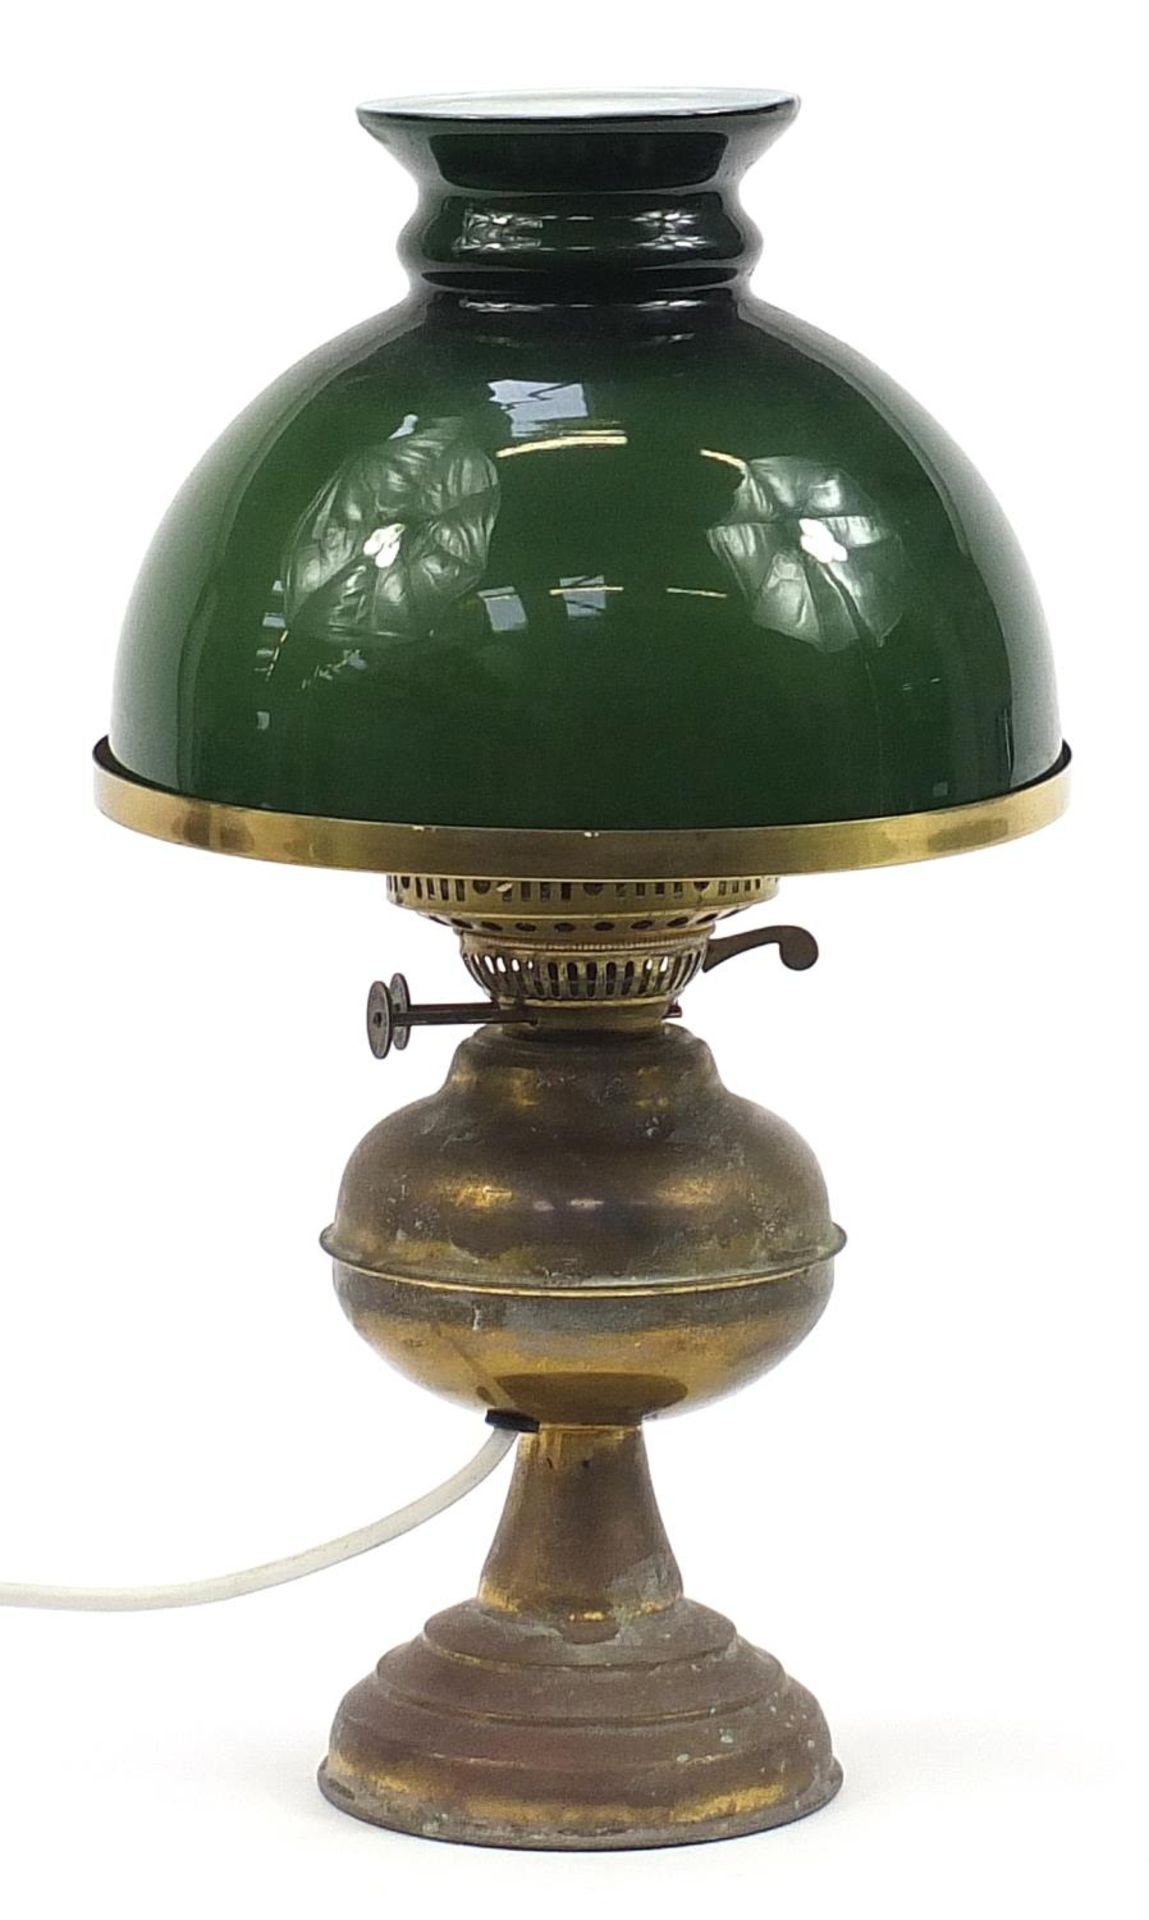 Victorian brass oil lamp with green glass shade converted to electric, 45cm high - Image 2 of 4